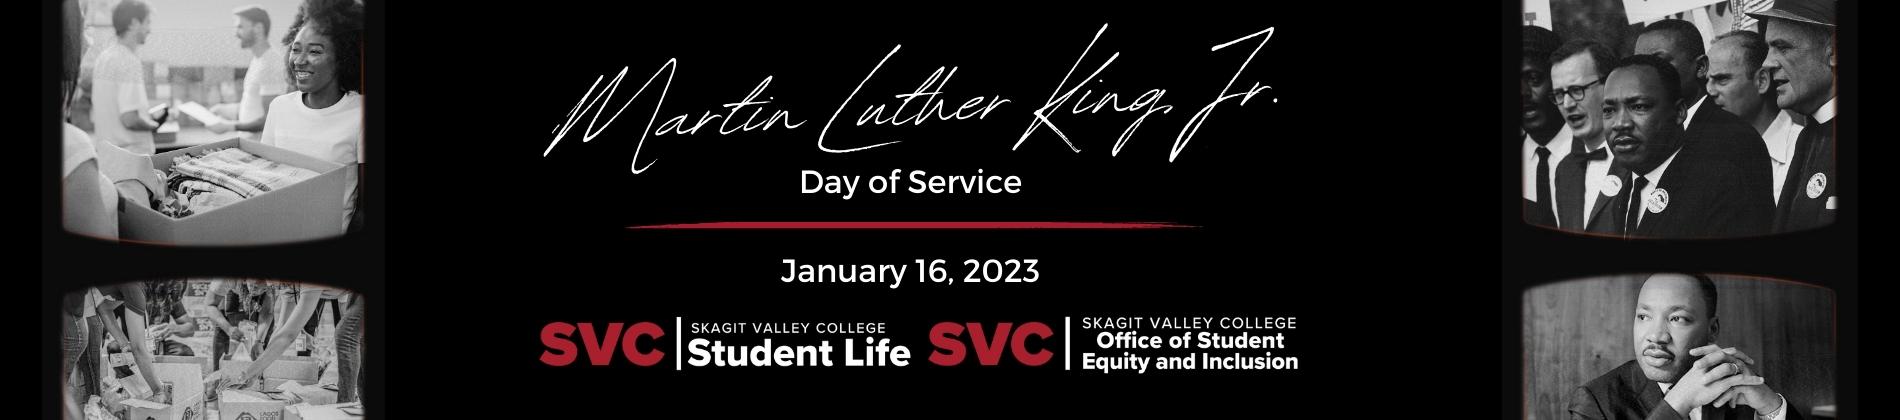 Martin Luther King Jr Day of Service, Jan. 16, 2023